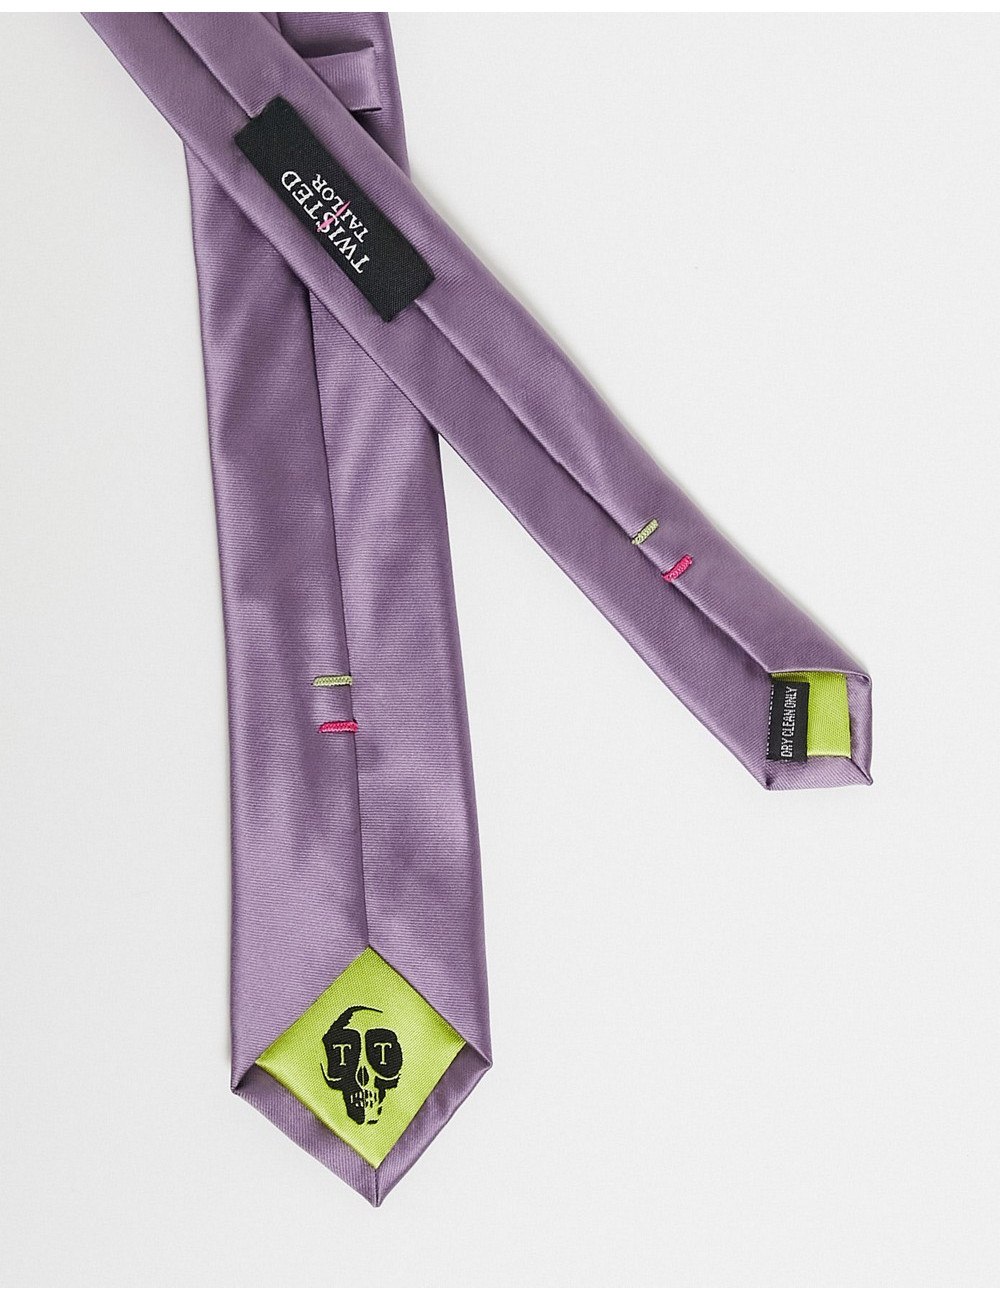 Twisted Tailor tie in mauve...